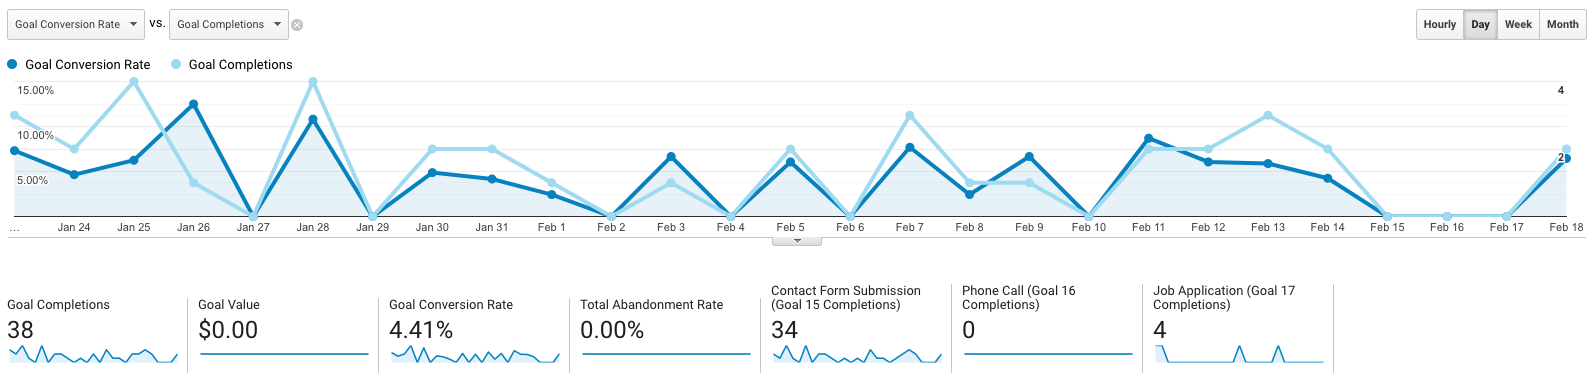 Goal Completions & Conversions from Google Analytics' Conversions Report